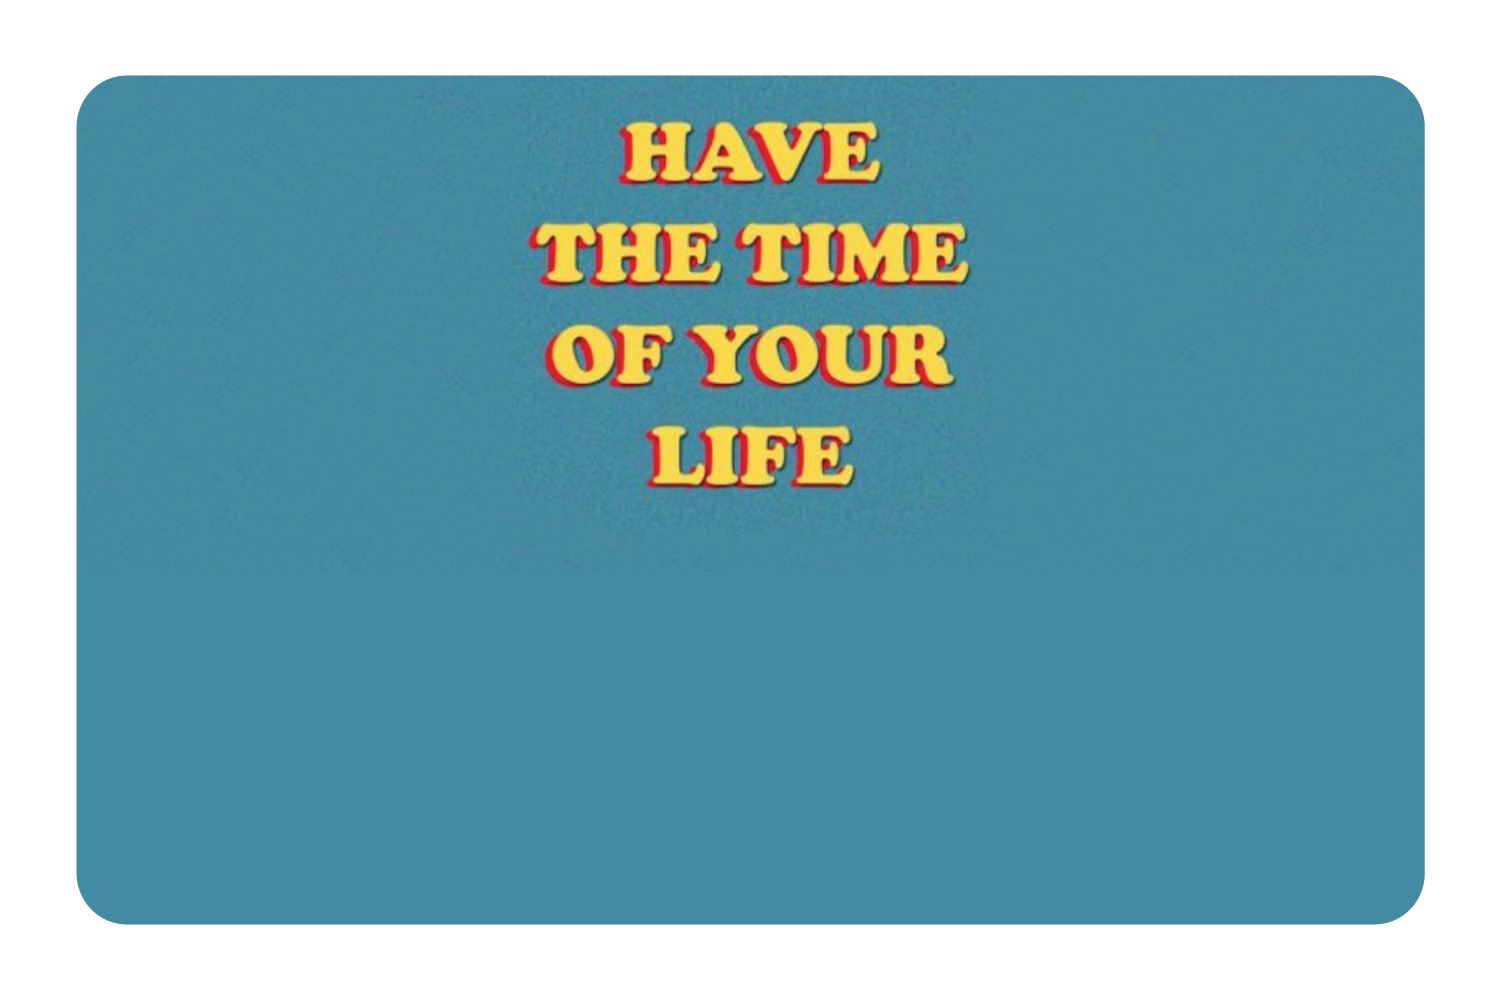 Have The Time of Your Life